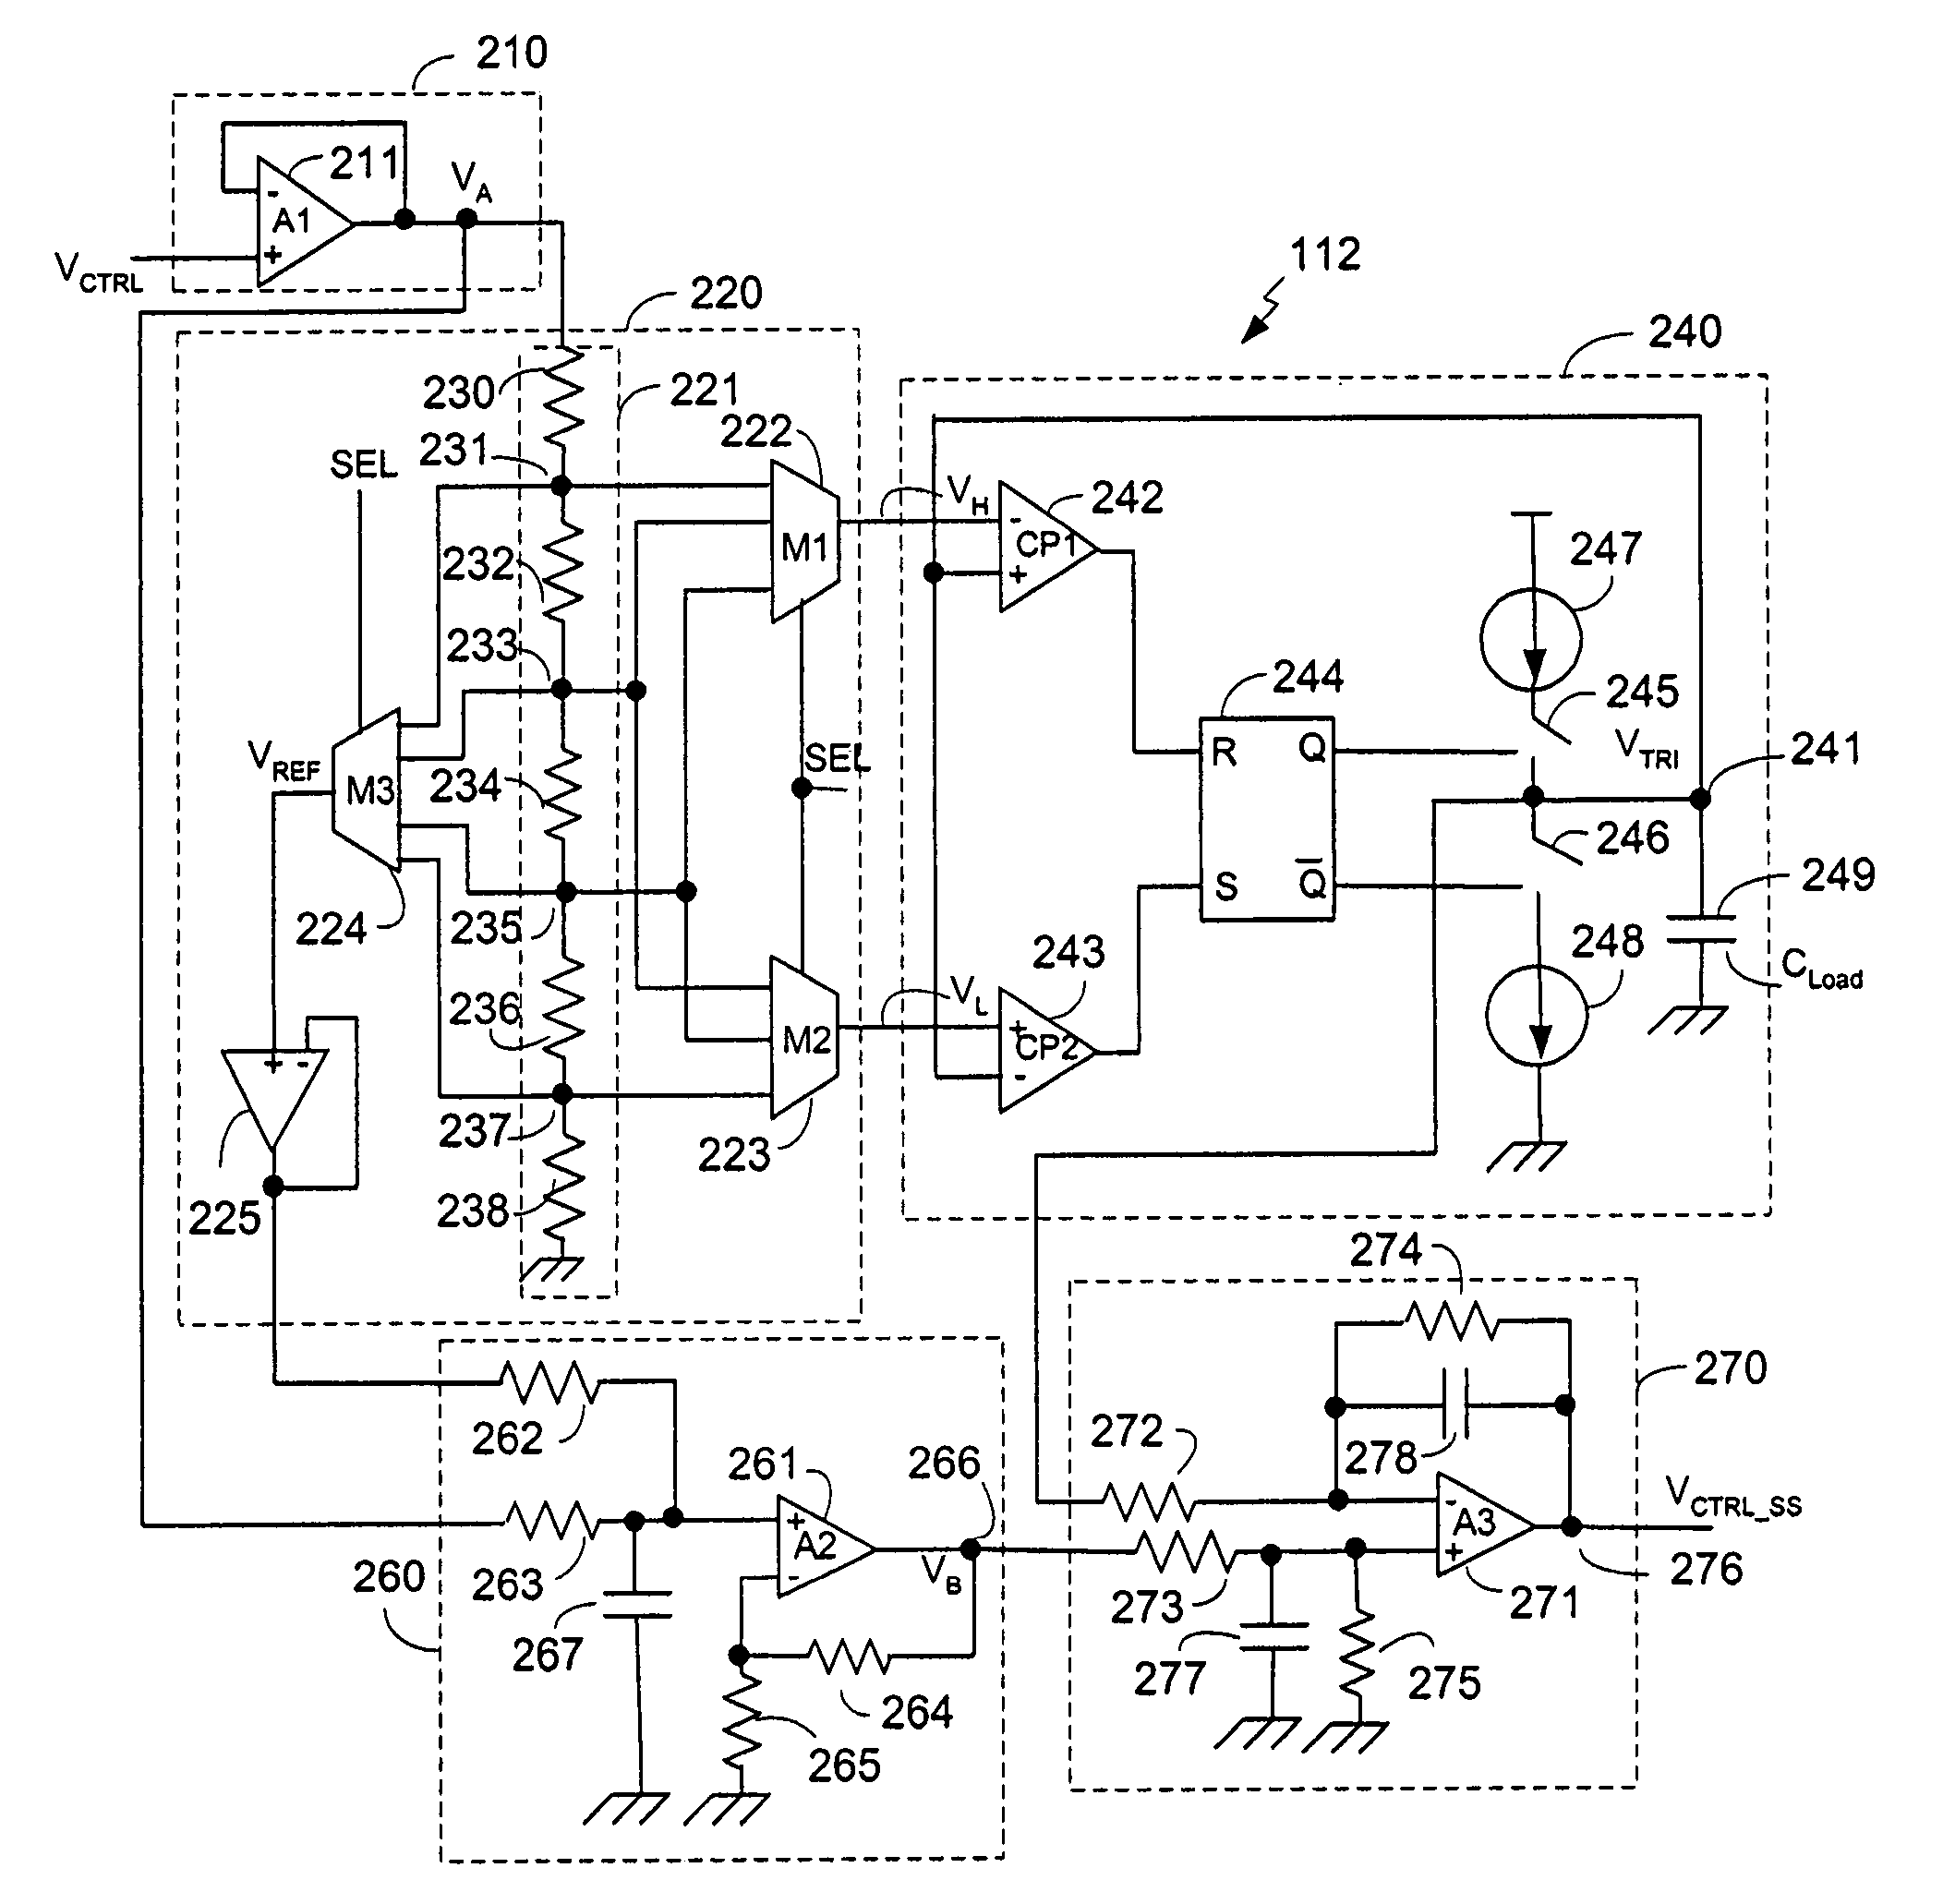 Analog implementation of spread spectrum frequency modulation in a programmable phase locked loop (PLL) system